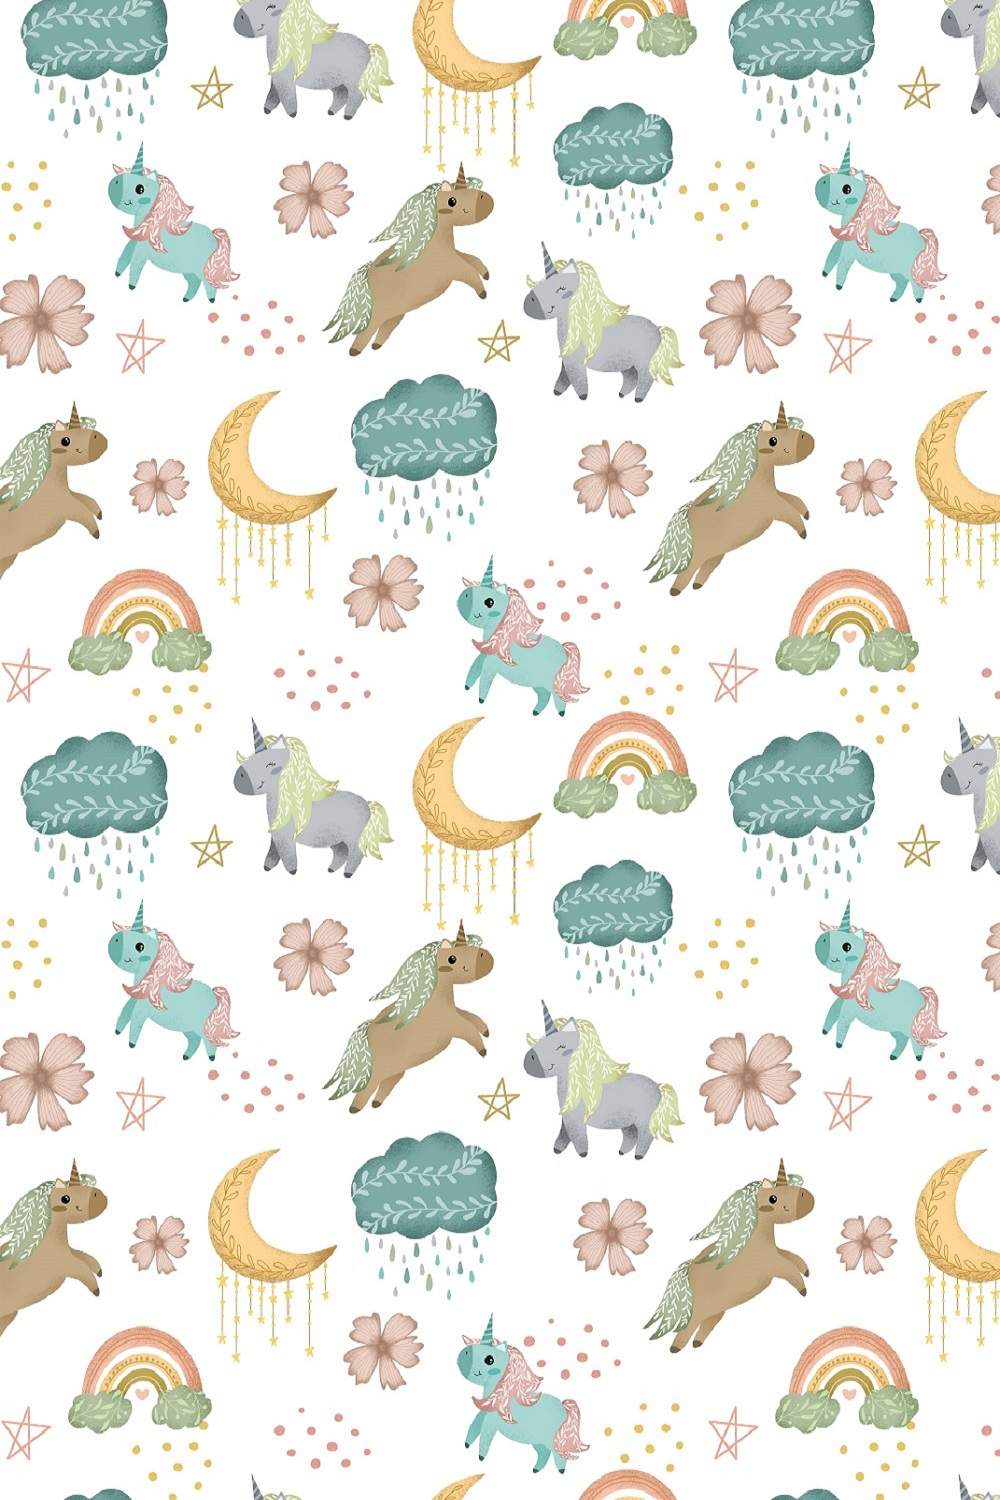 "Magical" unicorn & rainbow seamless patterns pinterest preview image.